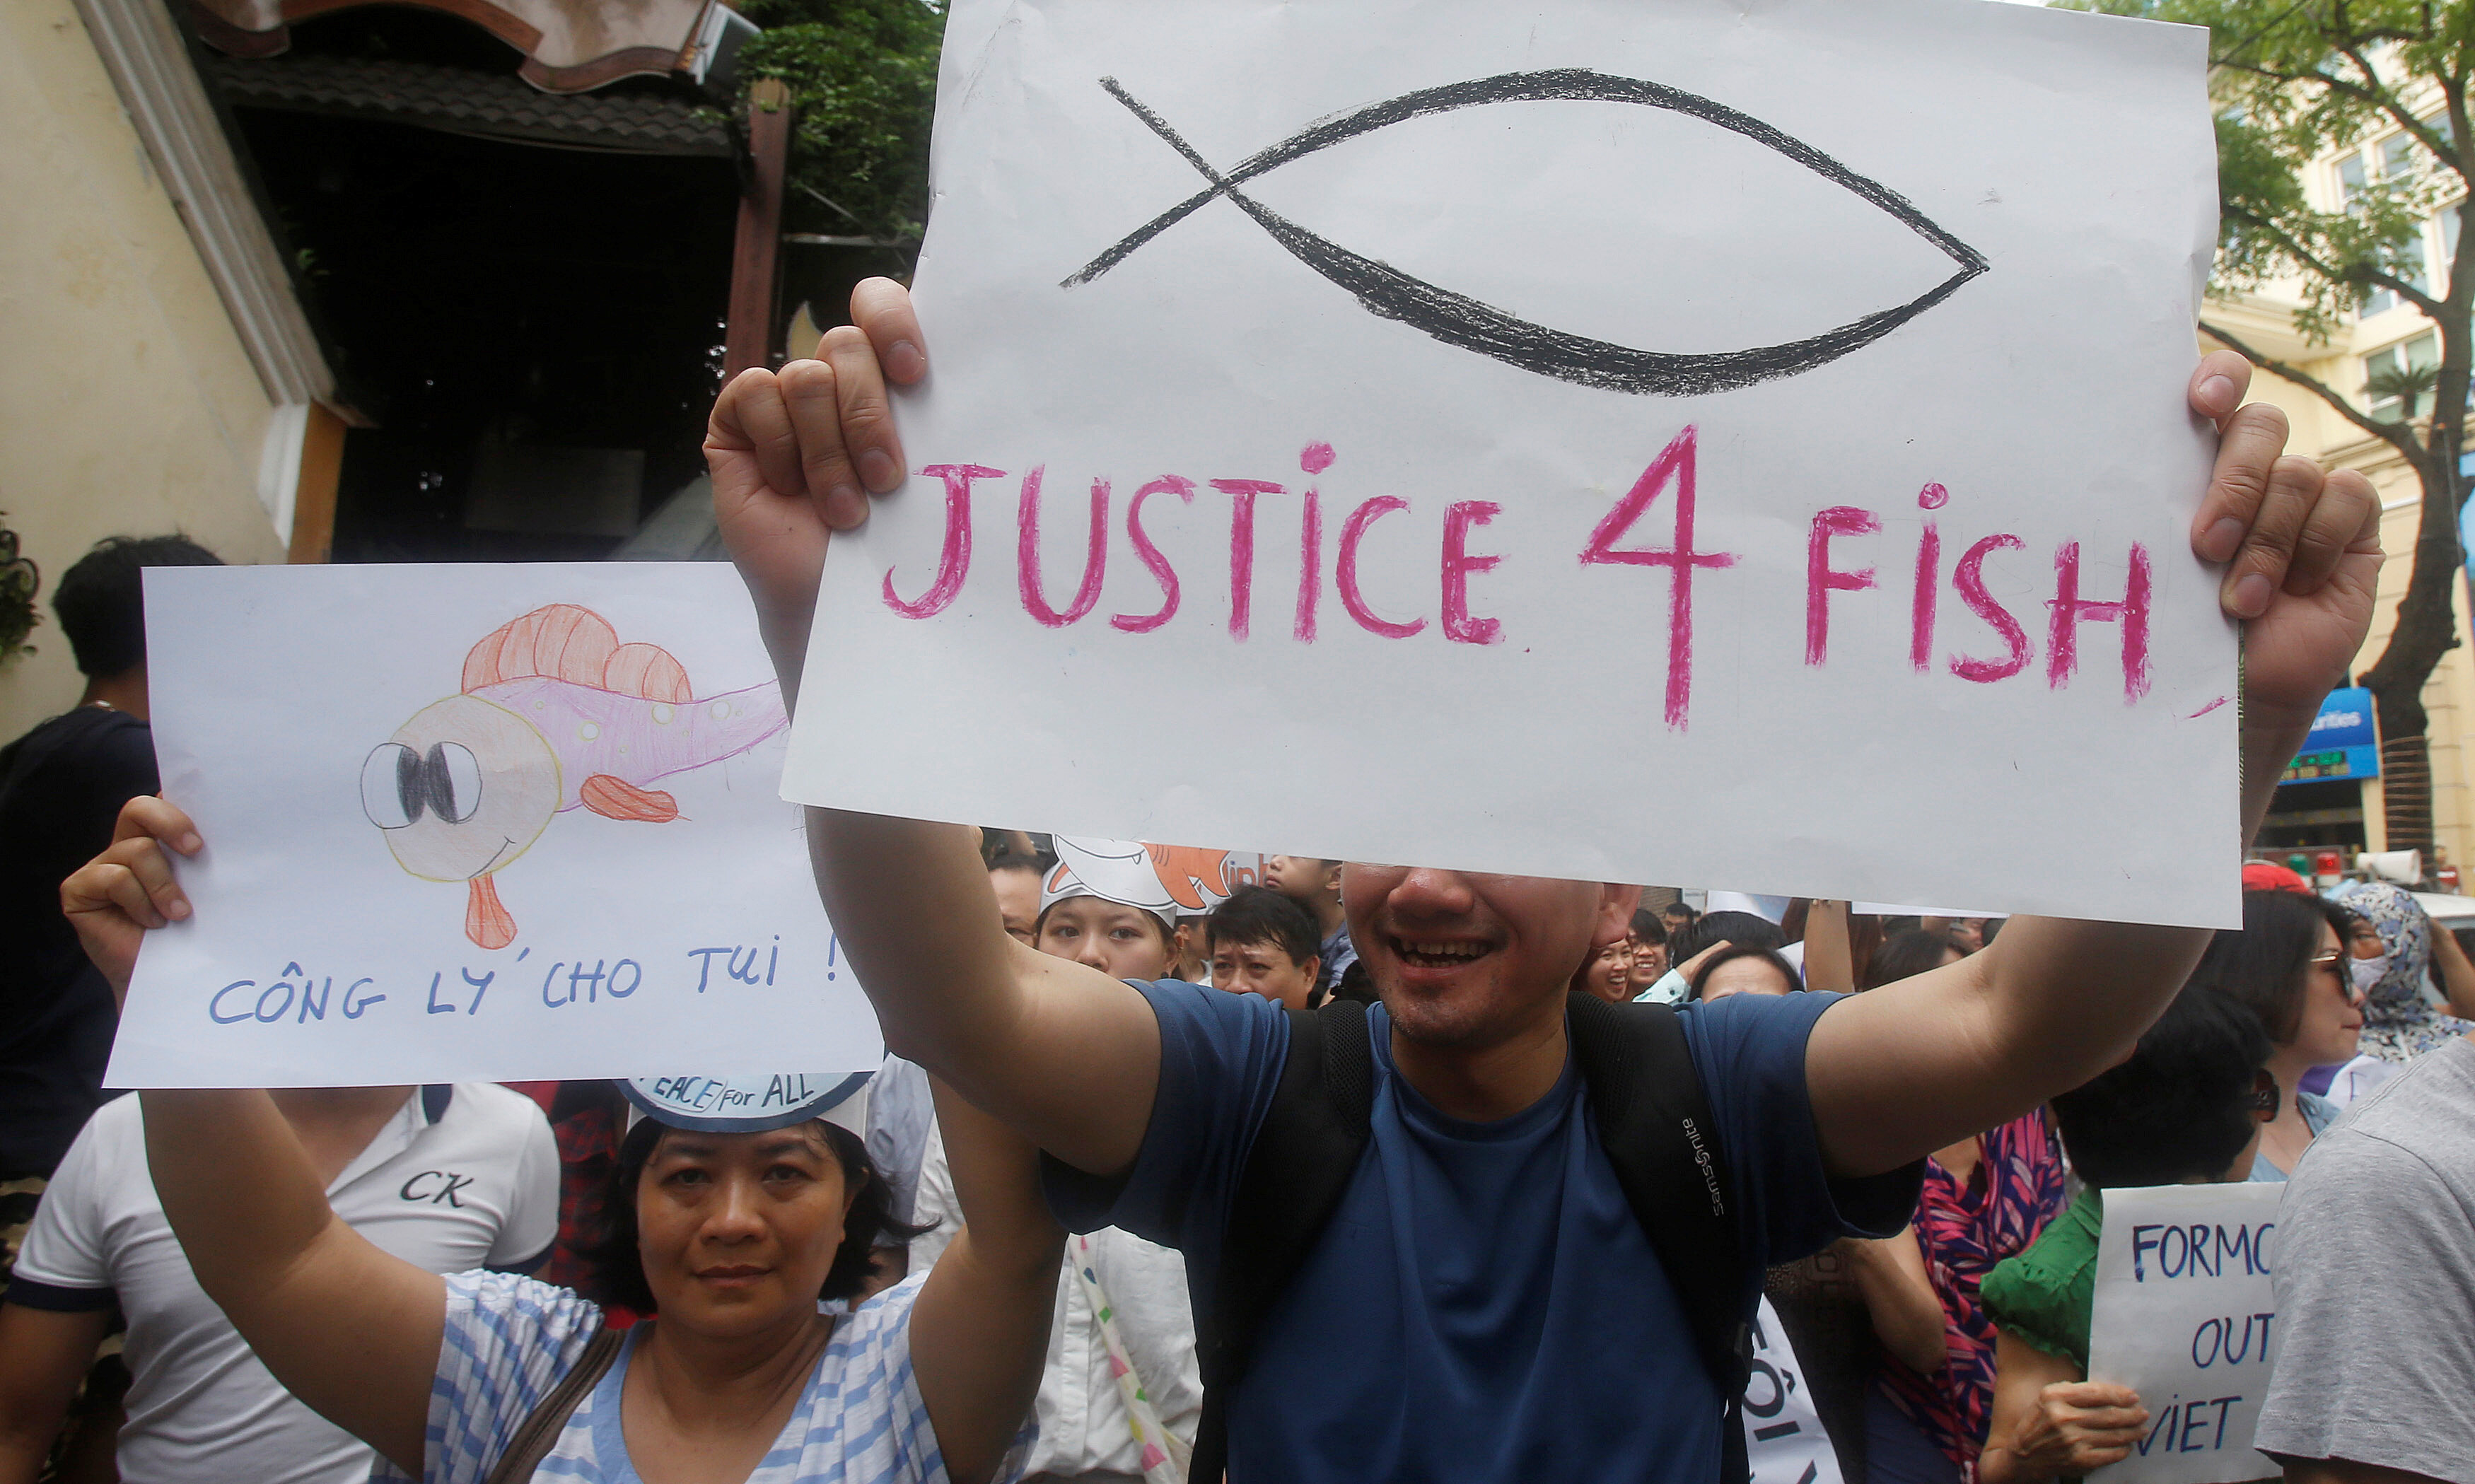 Demonstrators, holding signs, say they are demanding cleaner waters in the central regions after mass fish deaths in recent weeks, in Hanoi, Vietnam May 1, 2016. REUTERS Kham